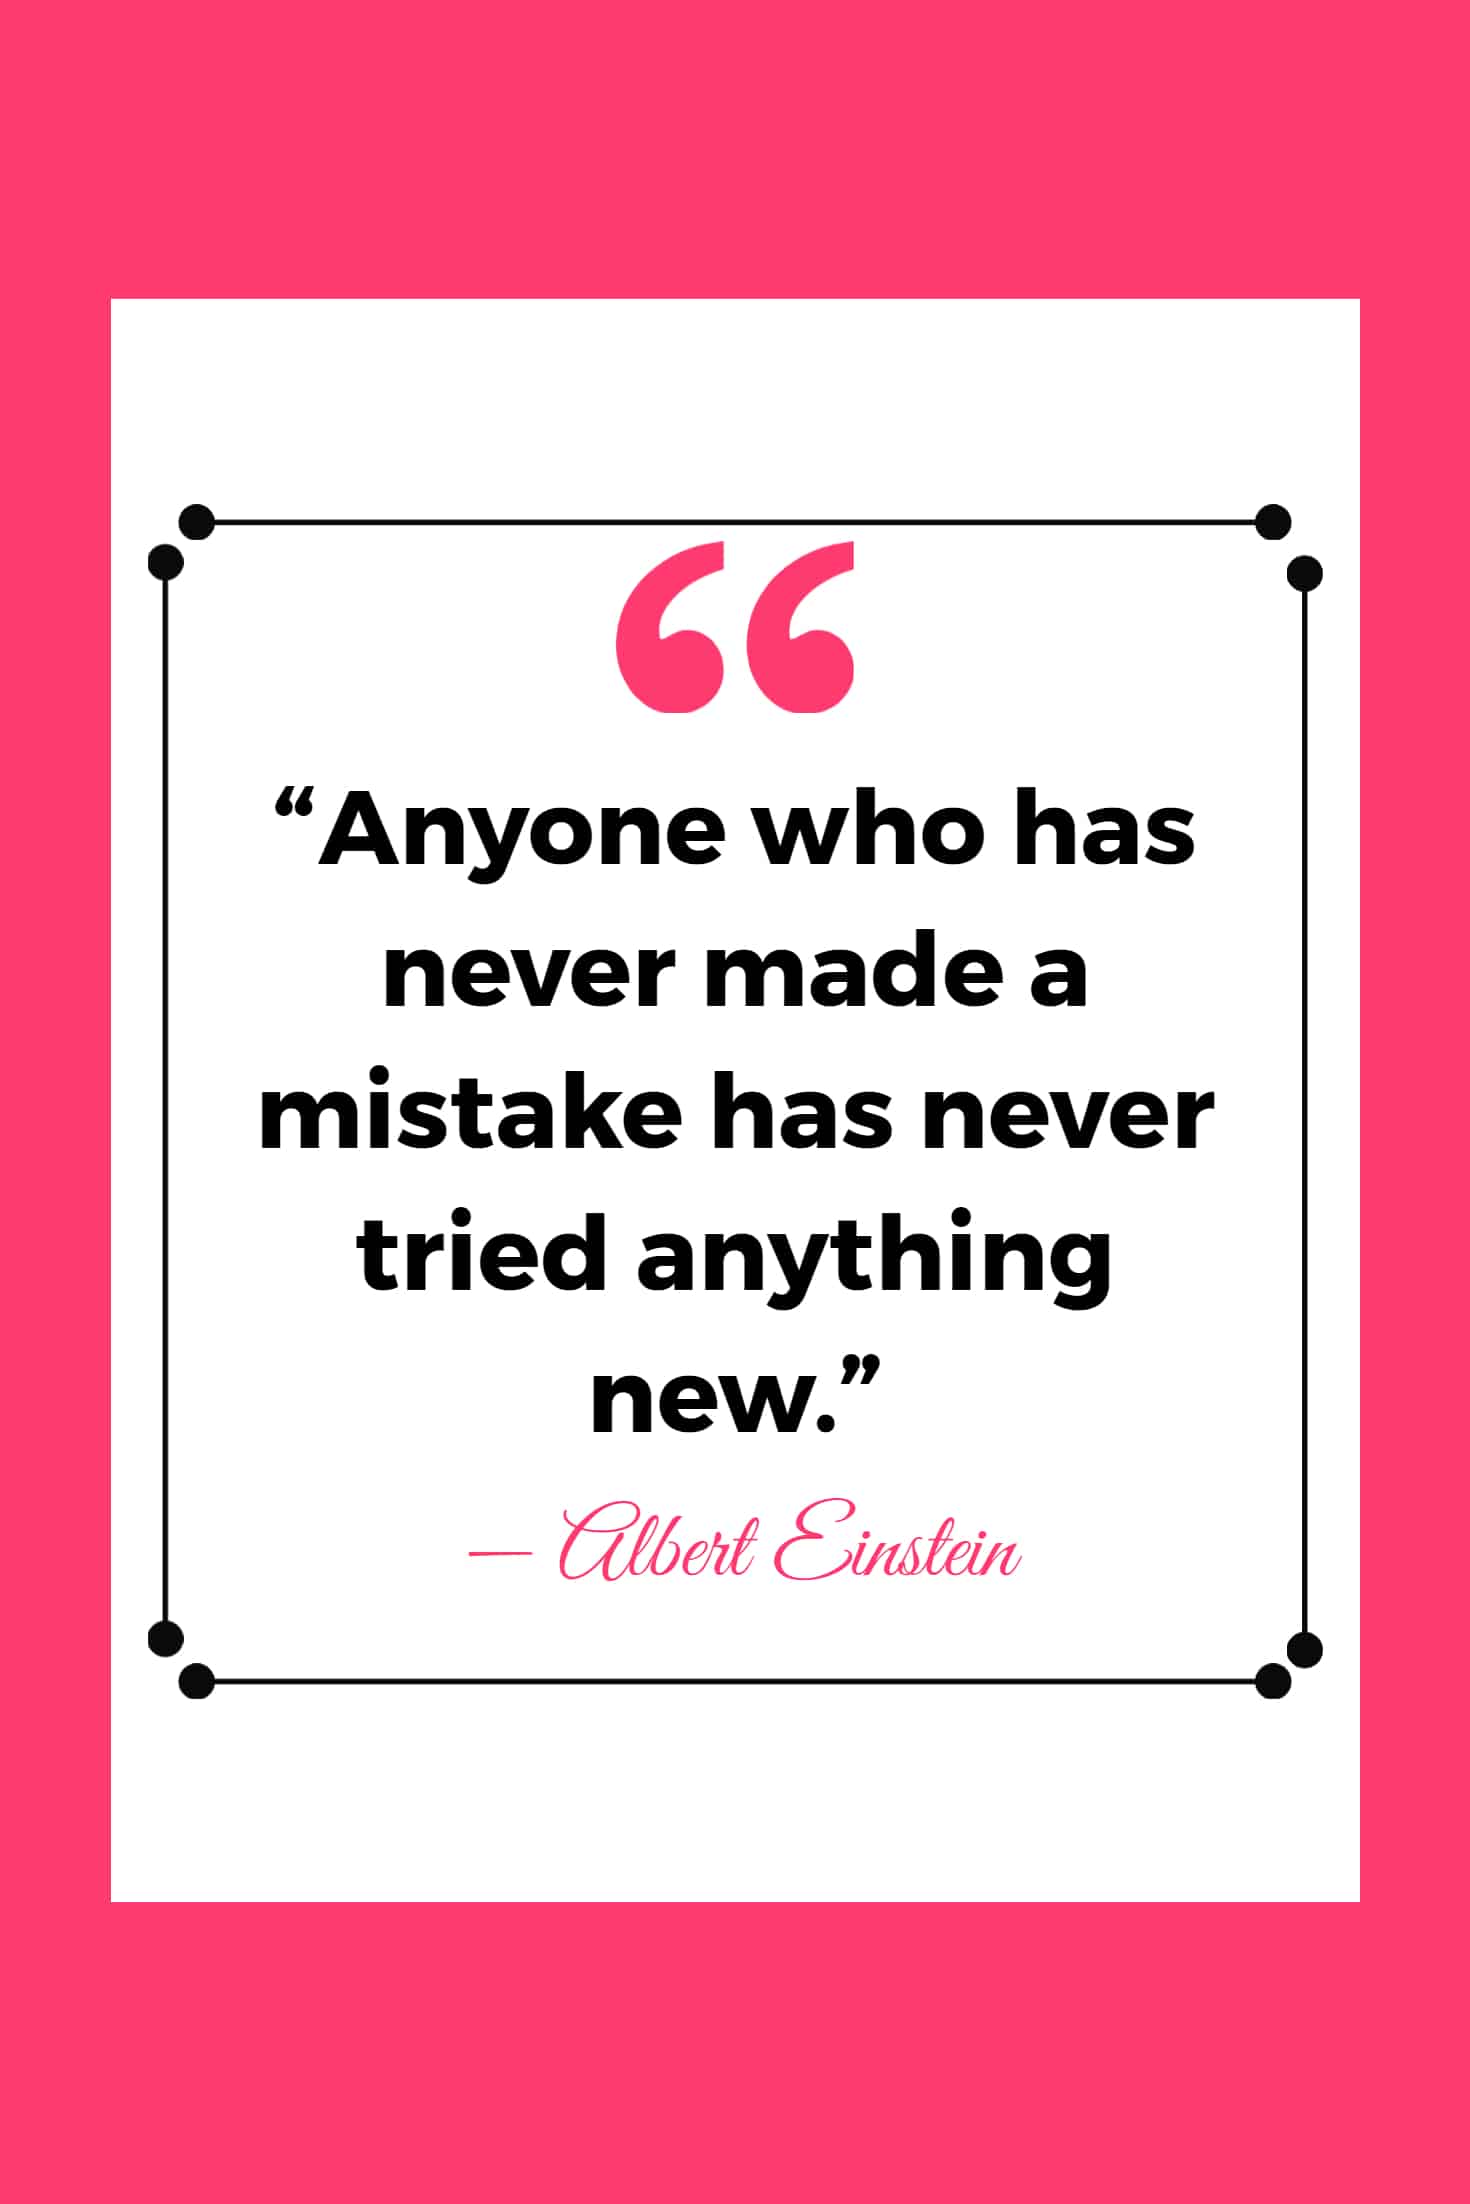 25 Inspirational Quotes About Mistakes - PrettyOpinionated